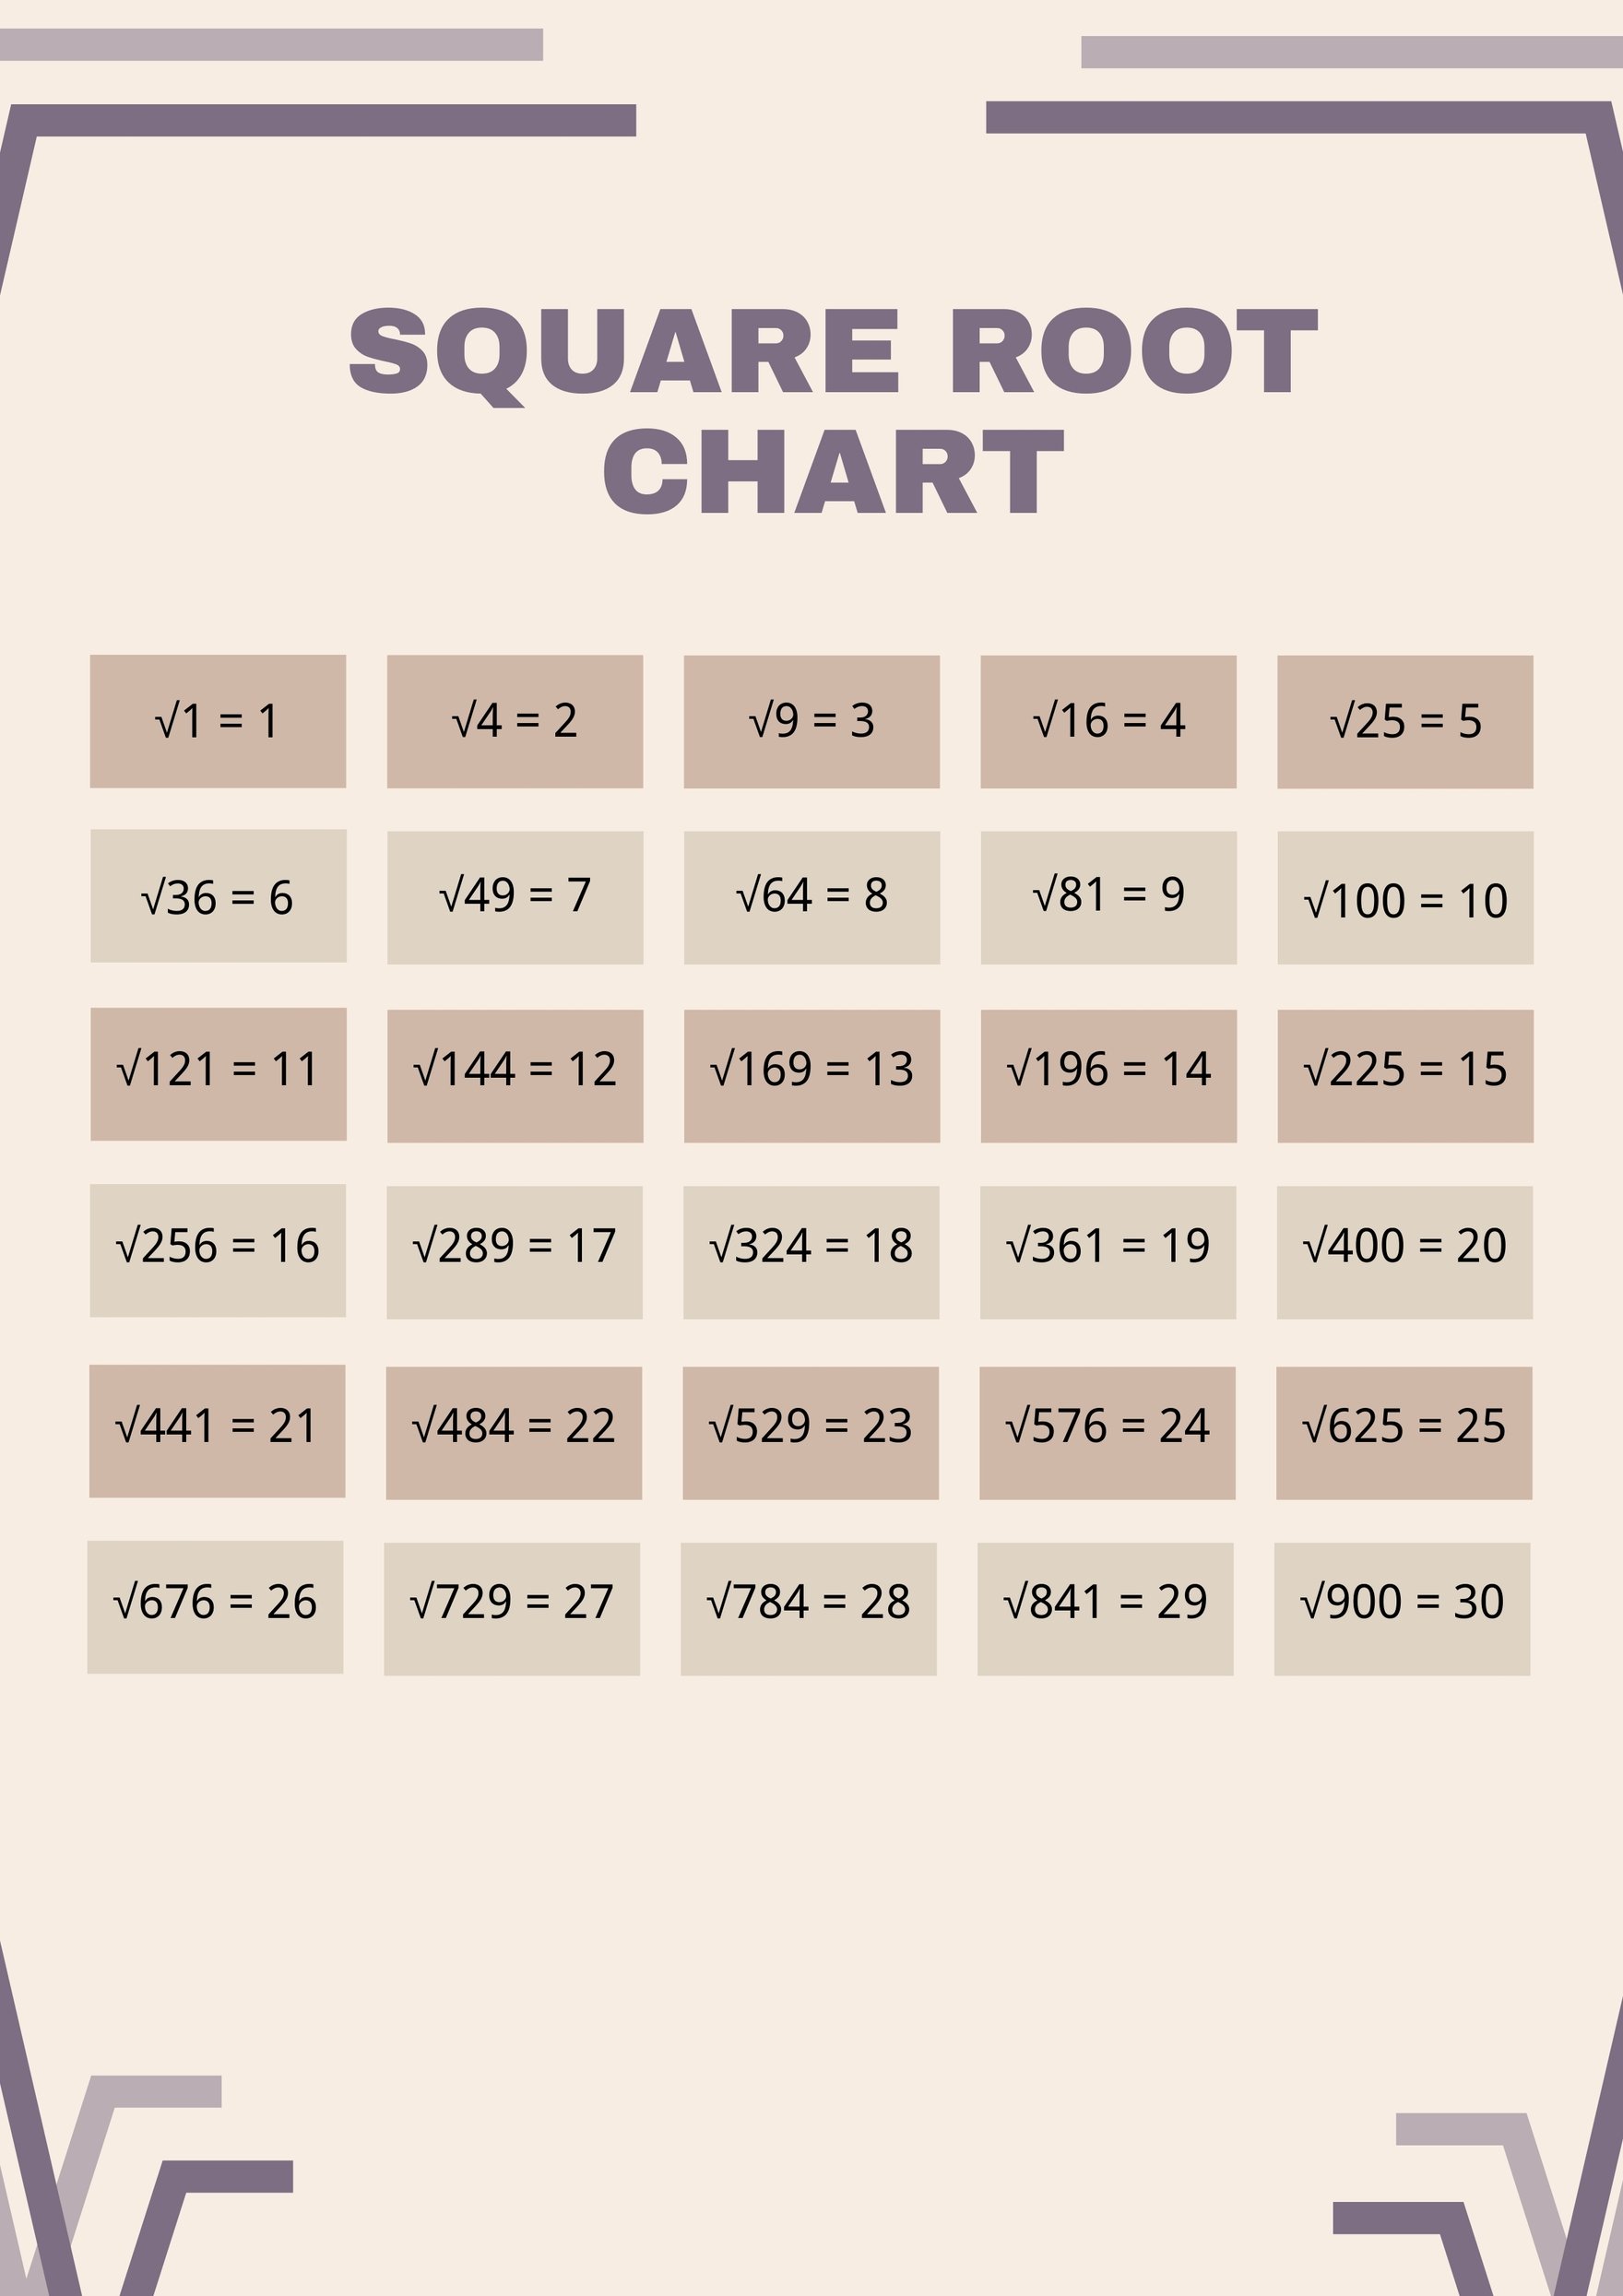 Square Root Chart